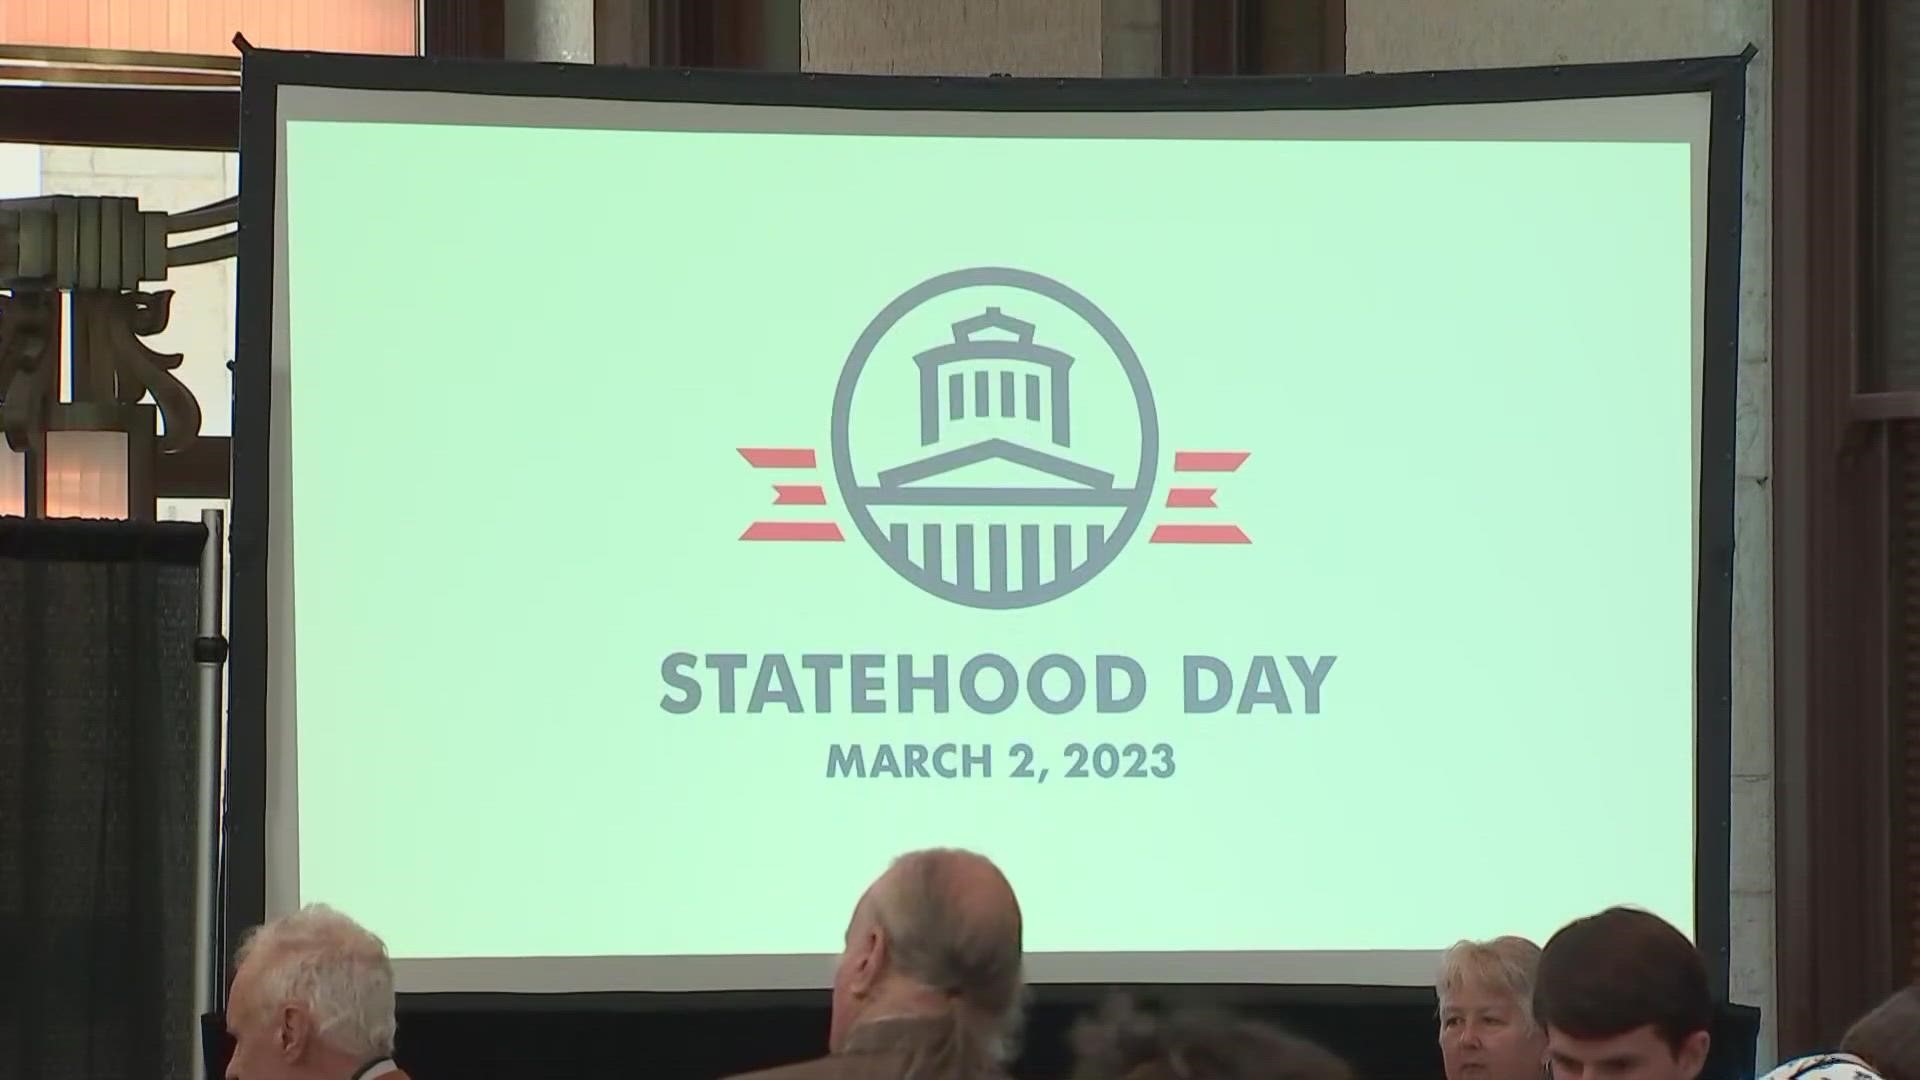 The Ohio History Connection had a celebration at the statehouse where they announced the winners of the Ohio History Leadership Award.